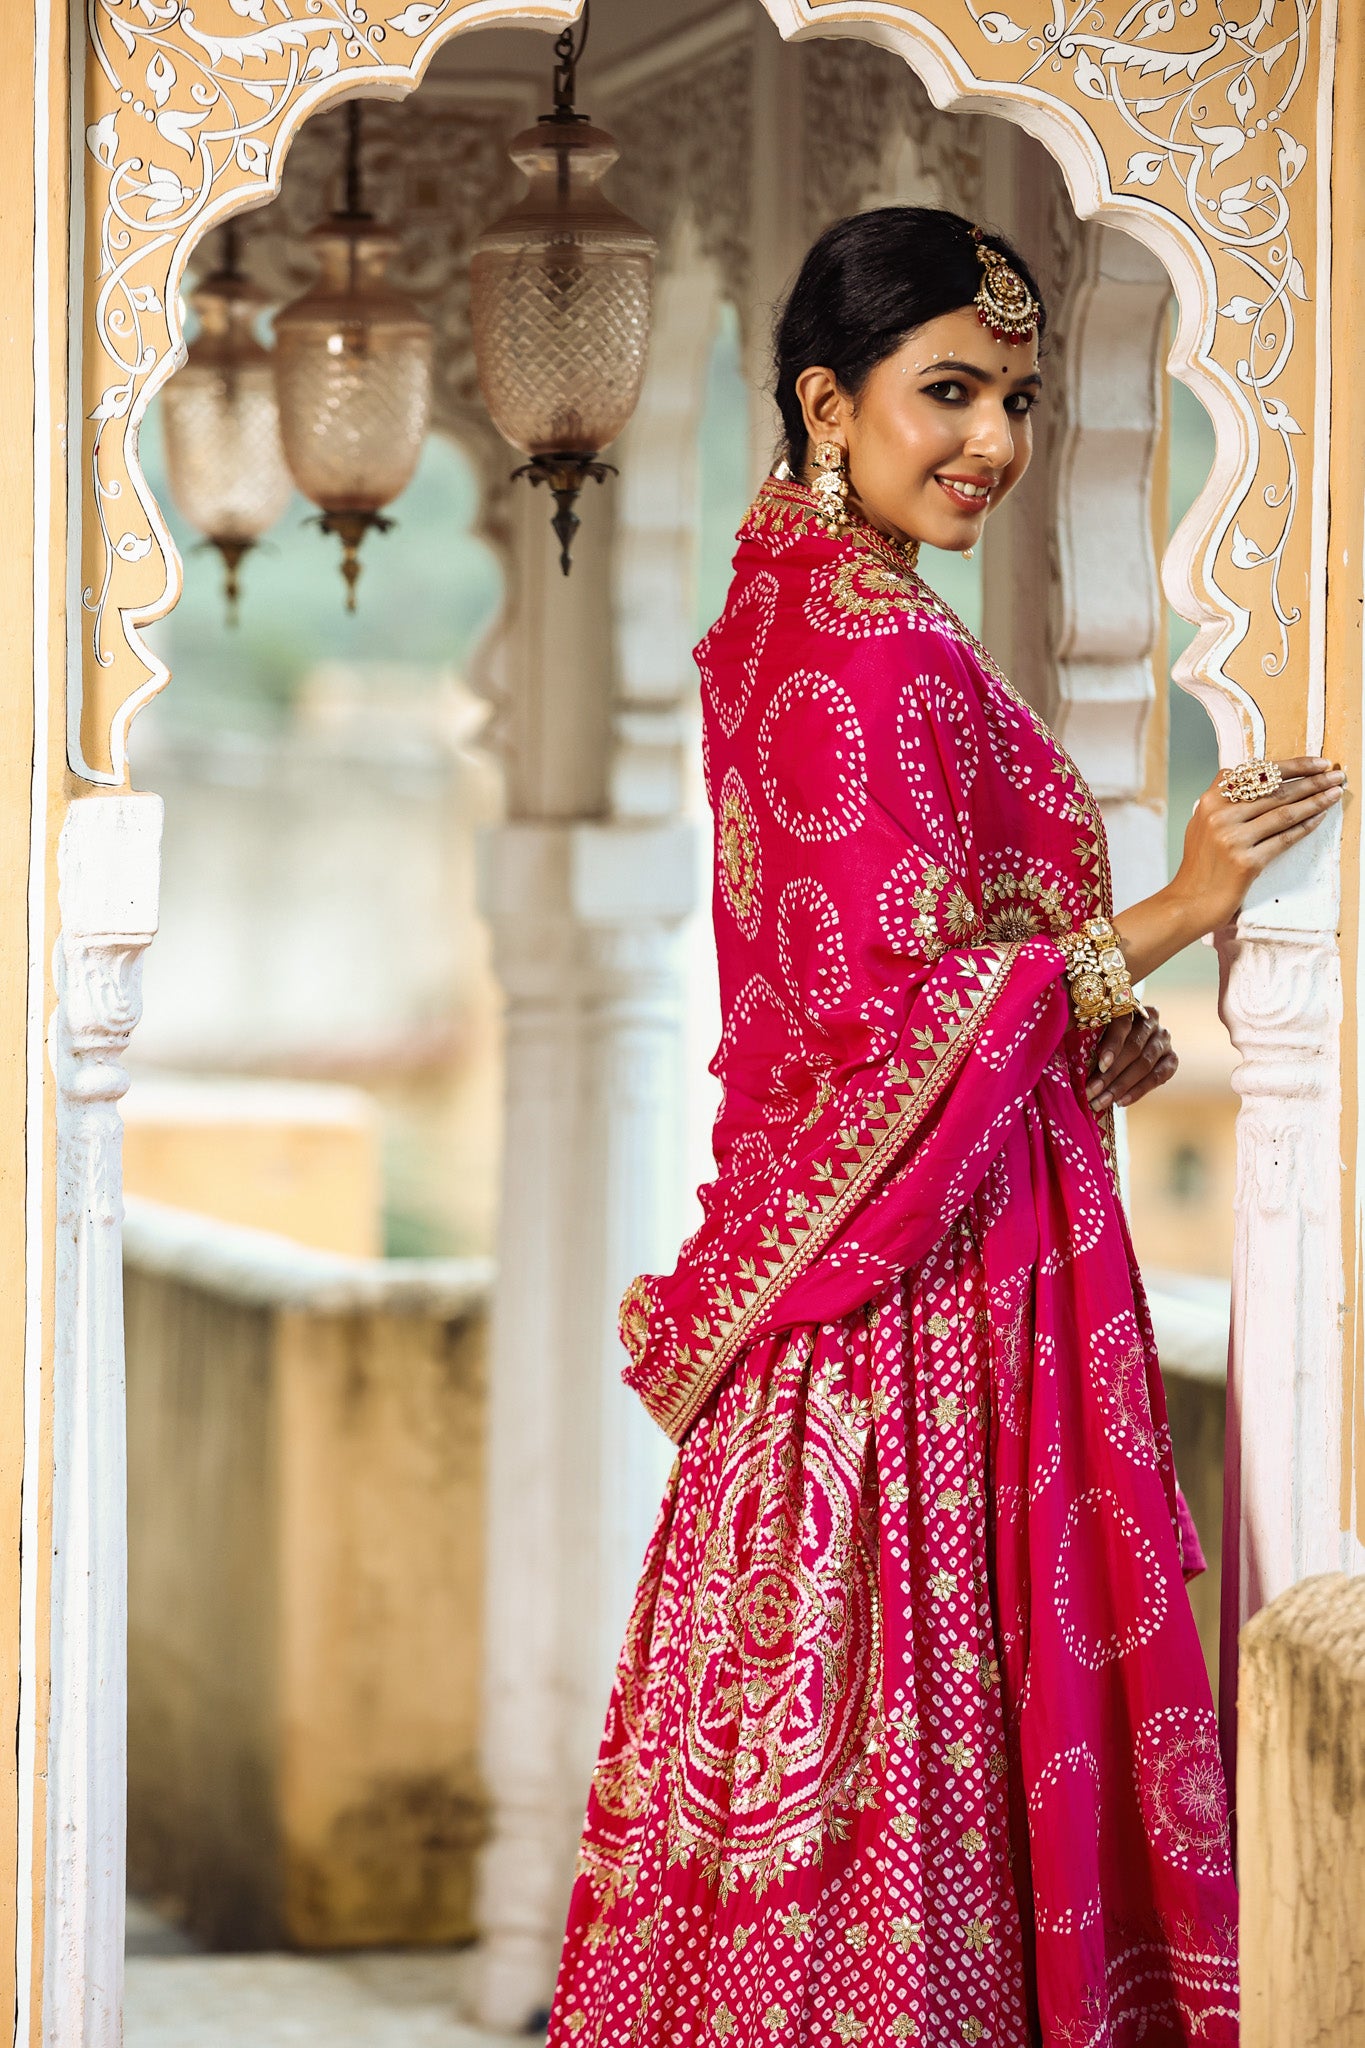 Shop a Pink bandhej print beautiful lehenga set with gota patti work and a long tassel attached to the lehenga. it comes with a pink blouse with front embroidery, hook closure, and tie-up at the back. Pair it with beautiful Rajasthani jewelry to enhance your look. Shop online from Pure Elegance.